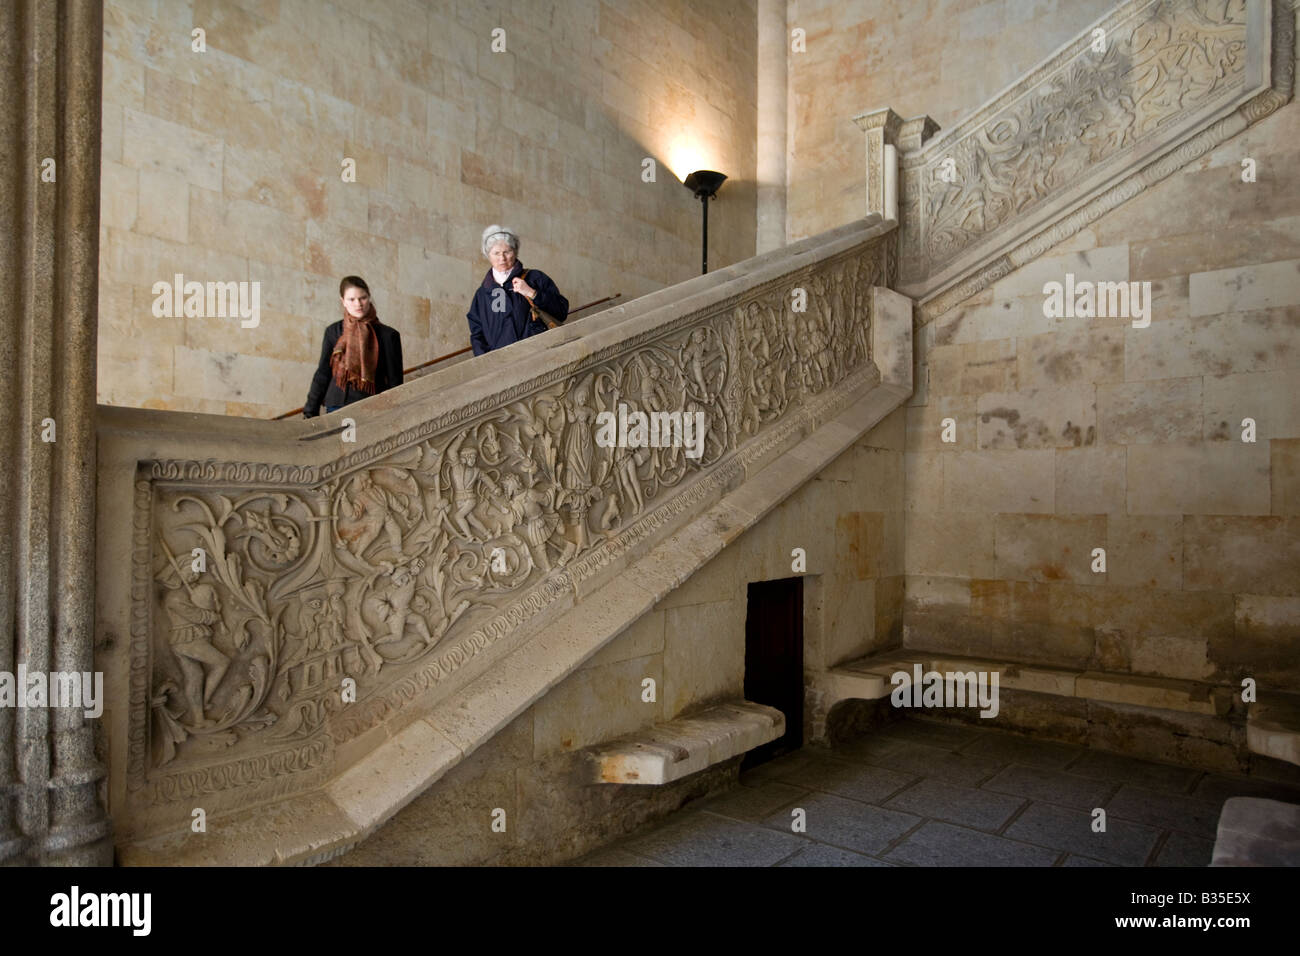 SPAIN Salamanca Two women descend staircase of the Historical Building at the University hermetic symbols carved into stone Stock Photo